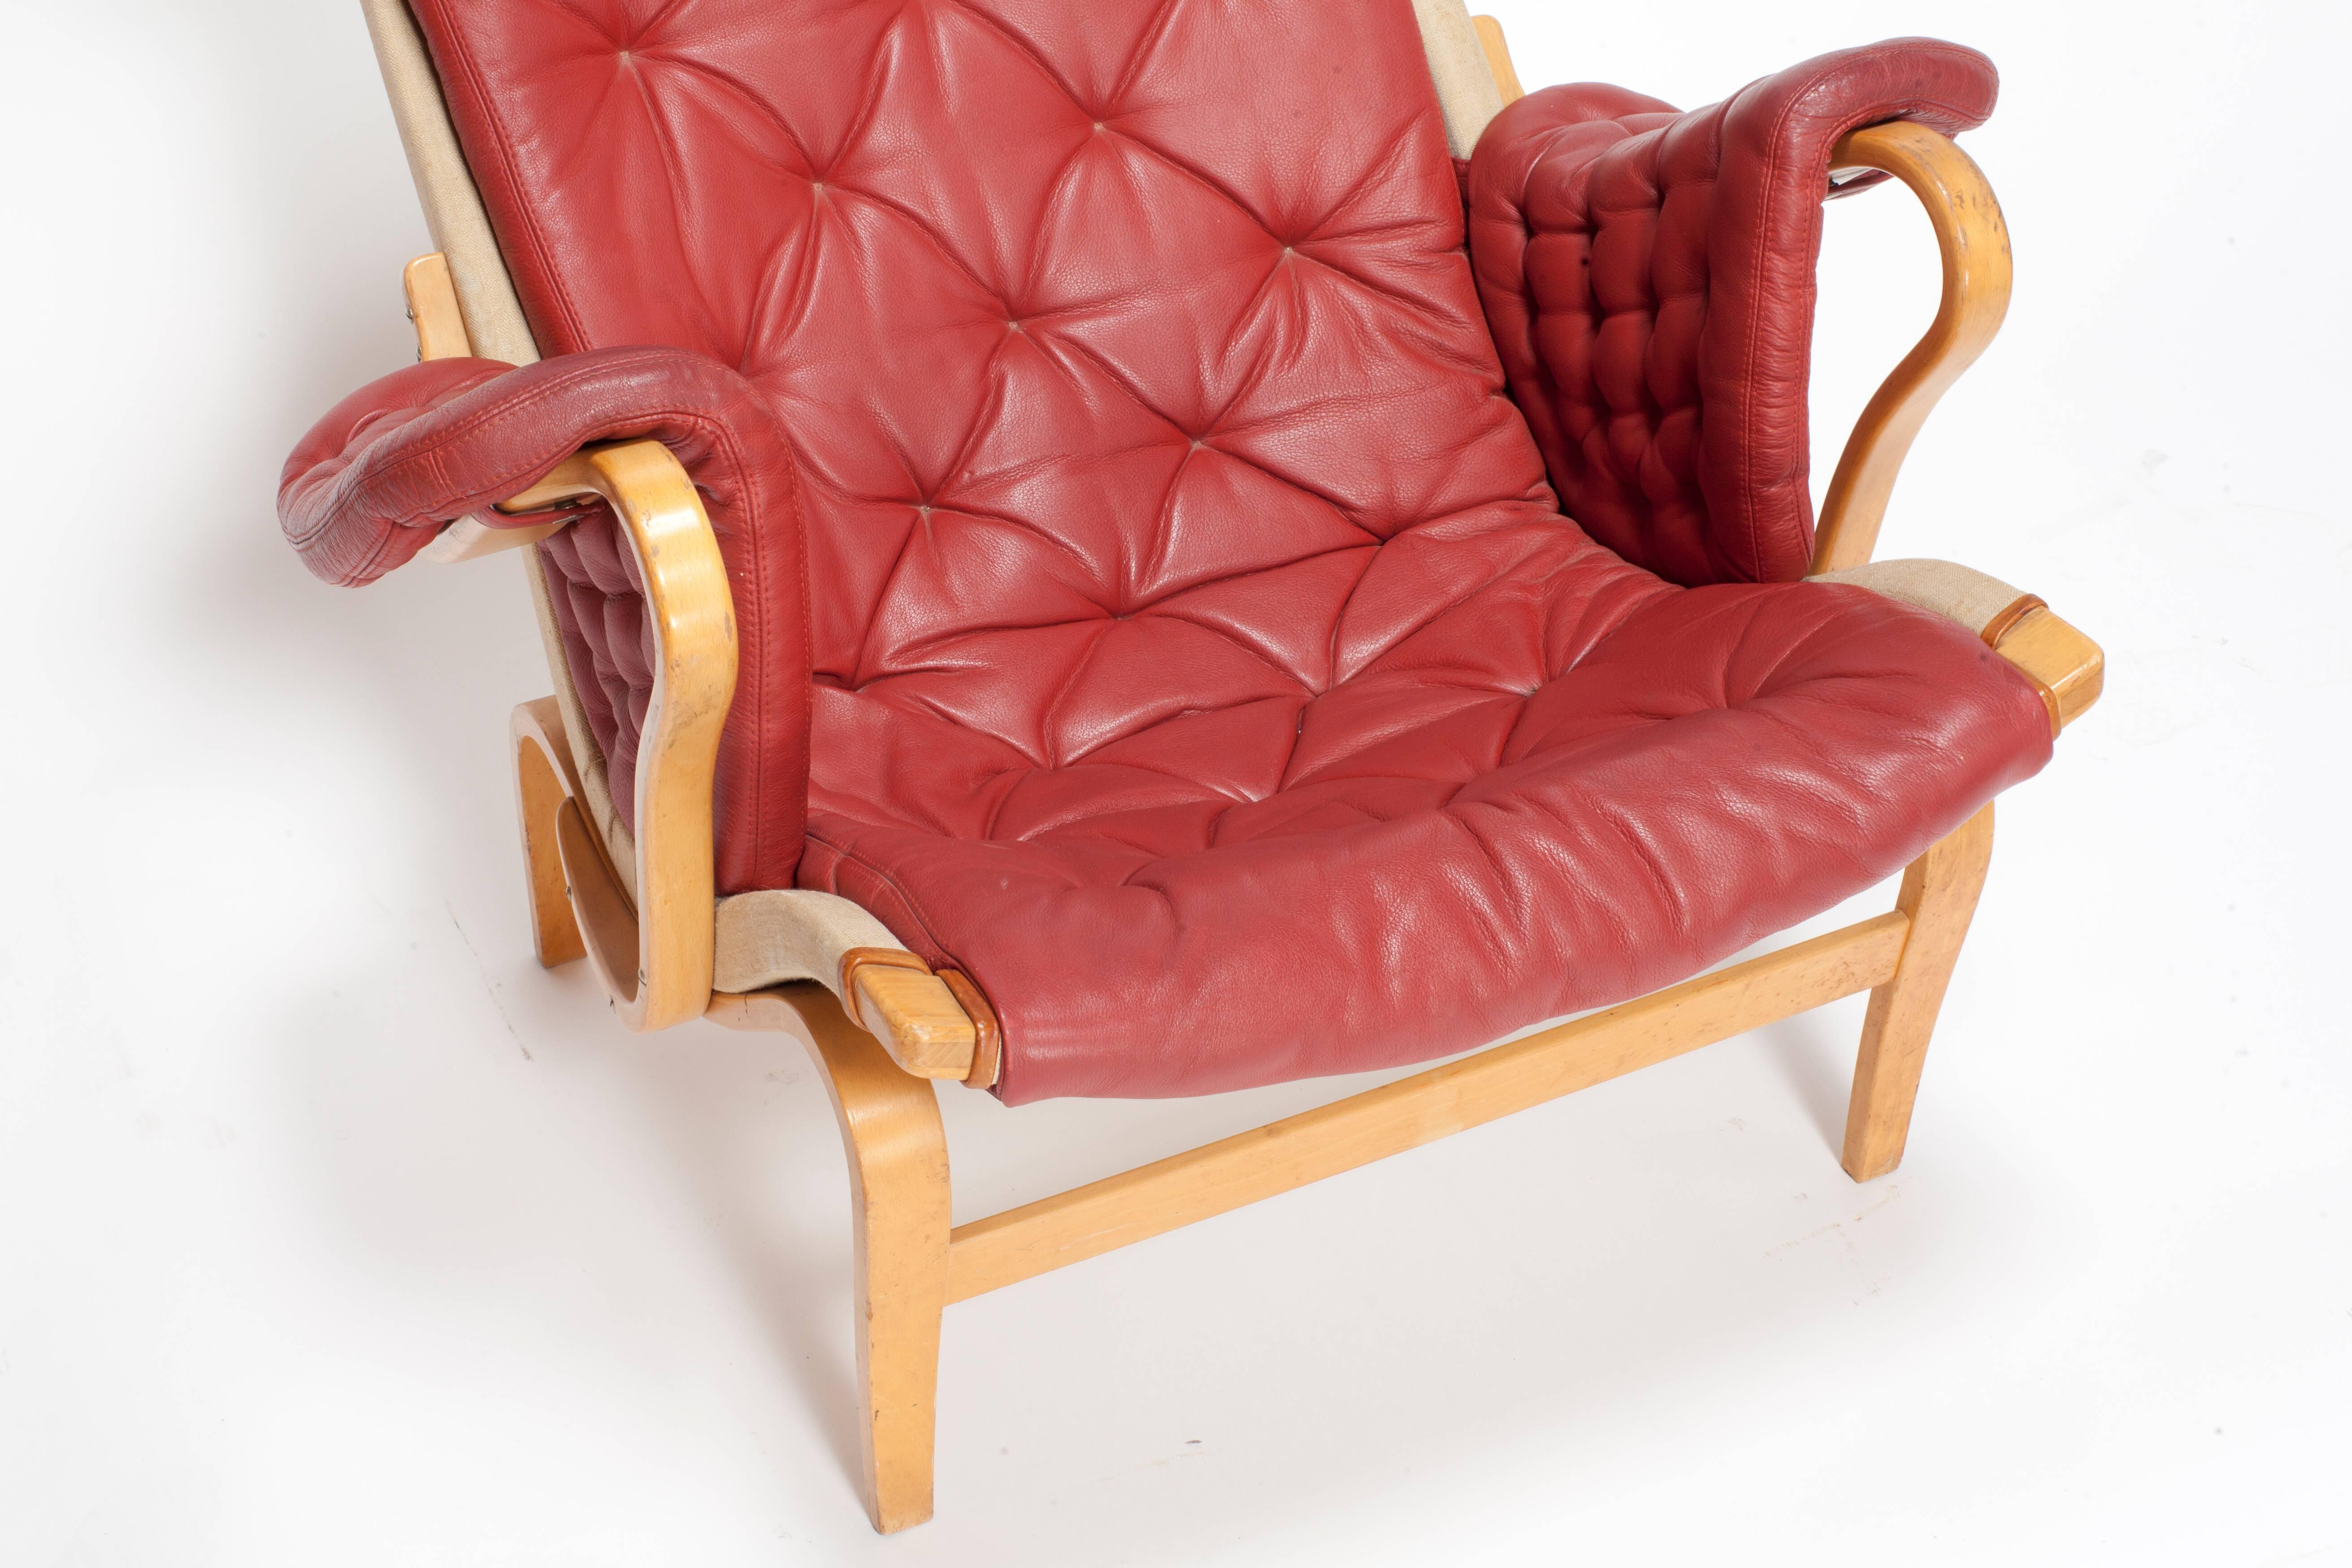 This Bruno Mathsson 'Pernilla' series lounge chair, comes with cushioned seats and headrests in tufted Red leather, against linen and bentwood frames in beech. The piece remains in overall good vintage condition, with presence of wear to original